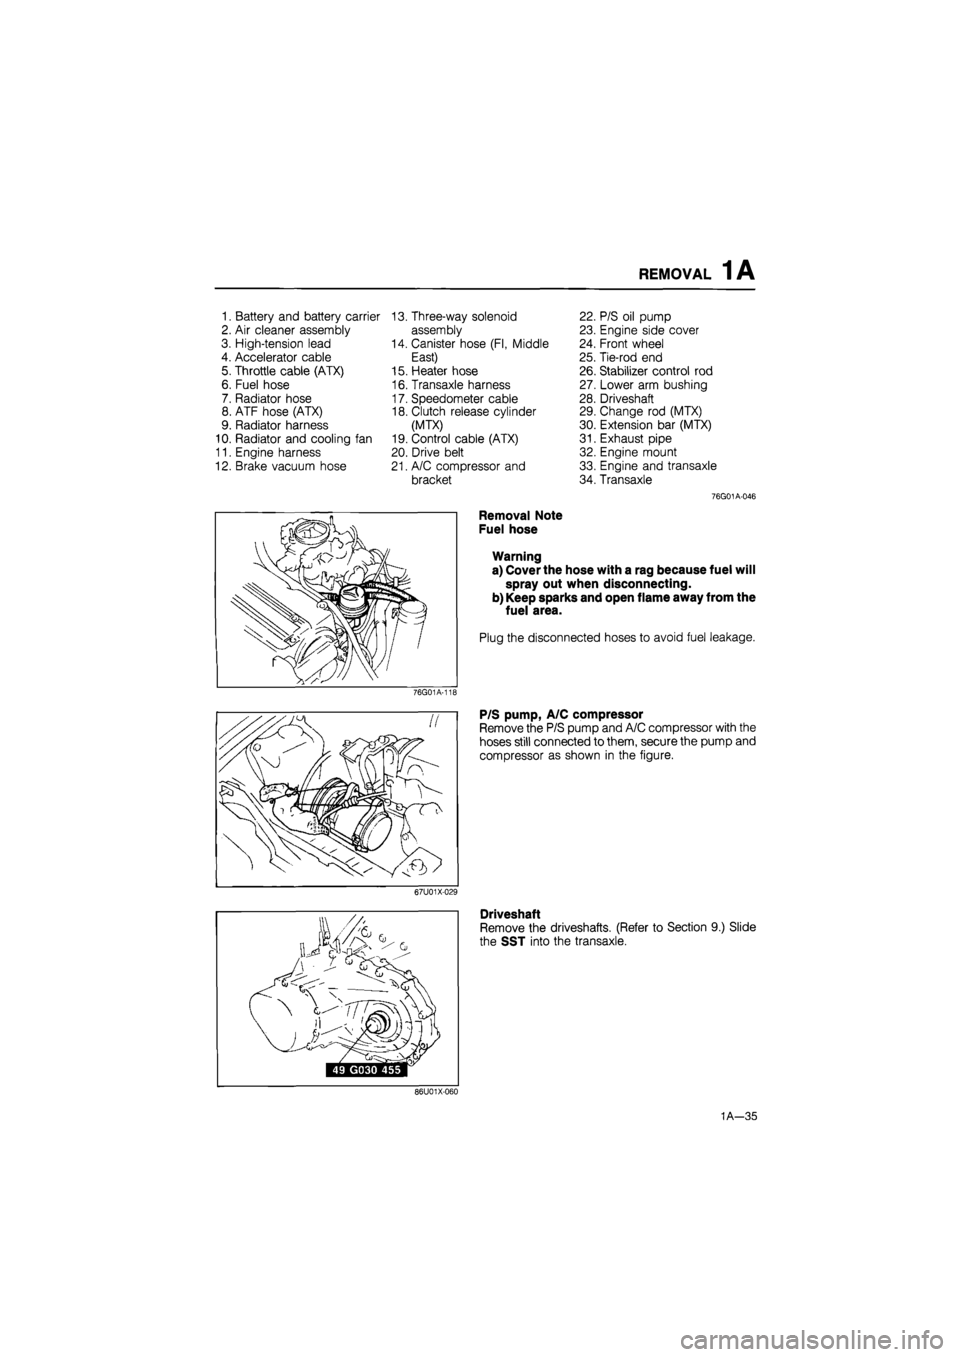 MAZDA 626 1987  Workshop Manual 
REMOVAL 1A 
1. Battery and battery carrier 13. Three-way solenoid 22. P/S oil pump 
2. Air cleaner assembly assembly 23. Engine side cover 
3. High-tension lead 14. Canister hose (Fl, Middle 24. Fron